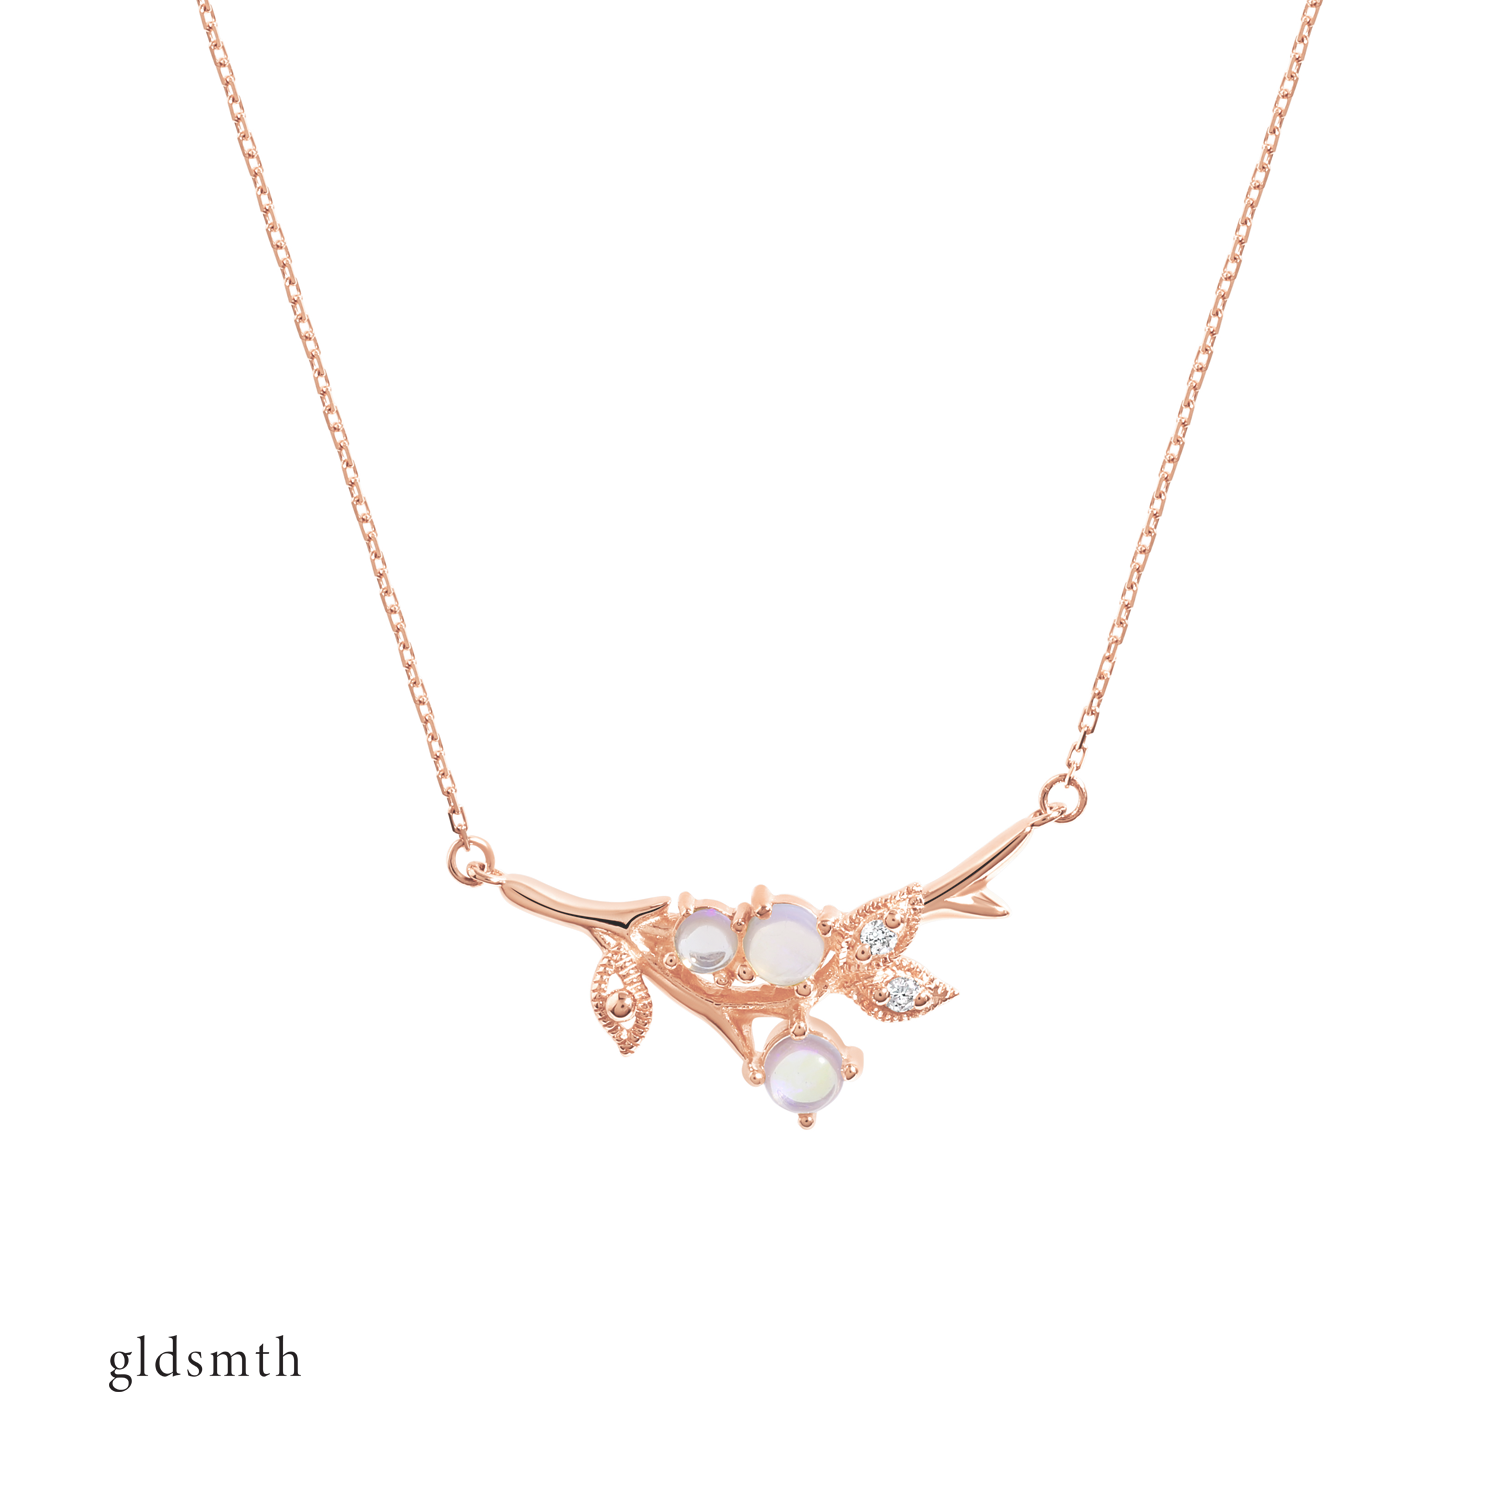 Dainty and fine necklace. Handcrafted 10k solid rose gold necklace with conflict-free diamonds and opals.